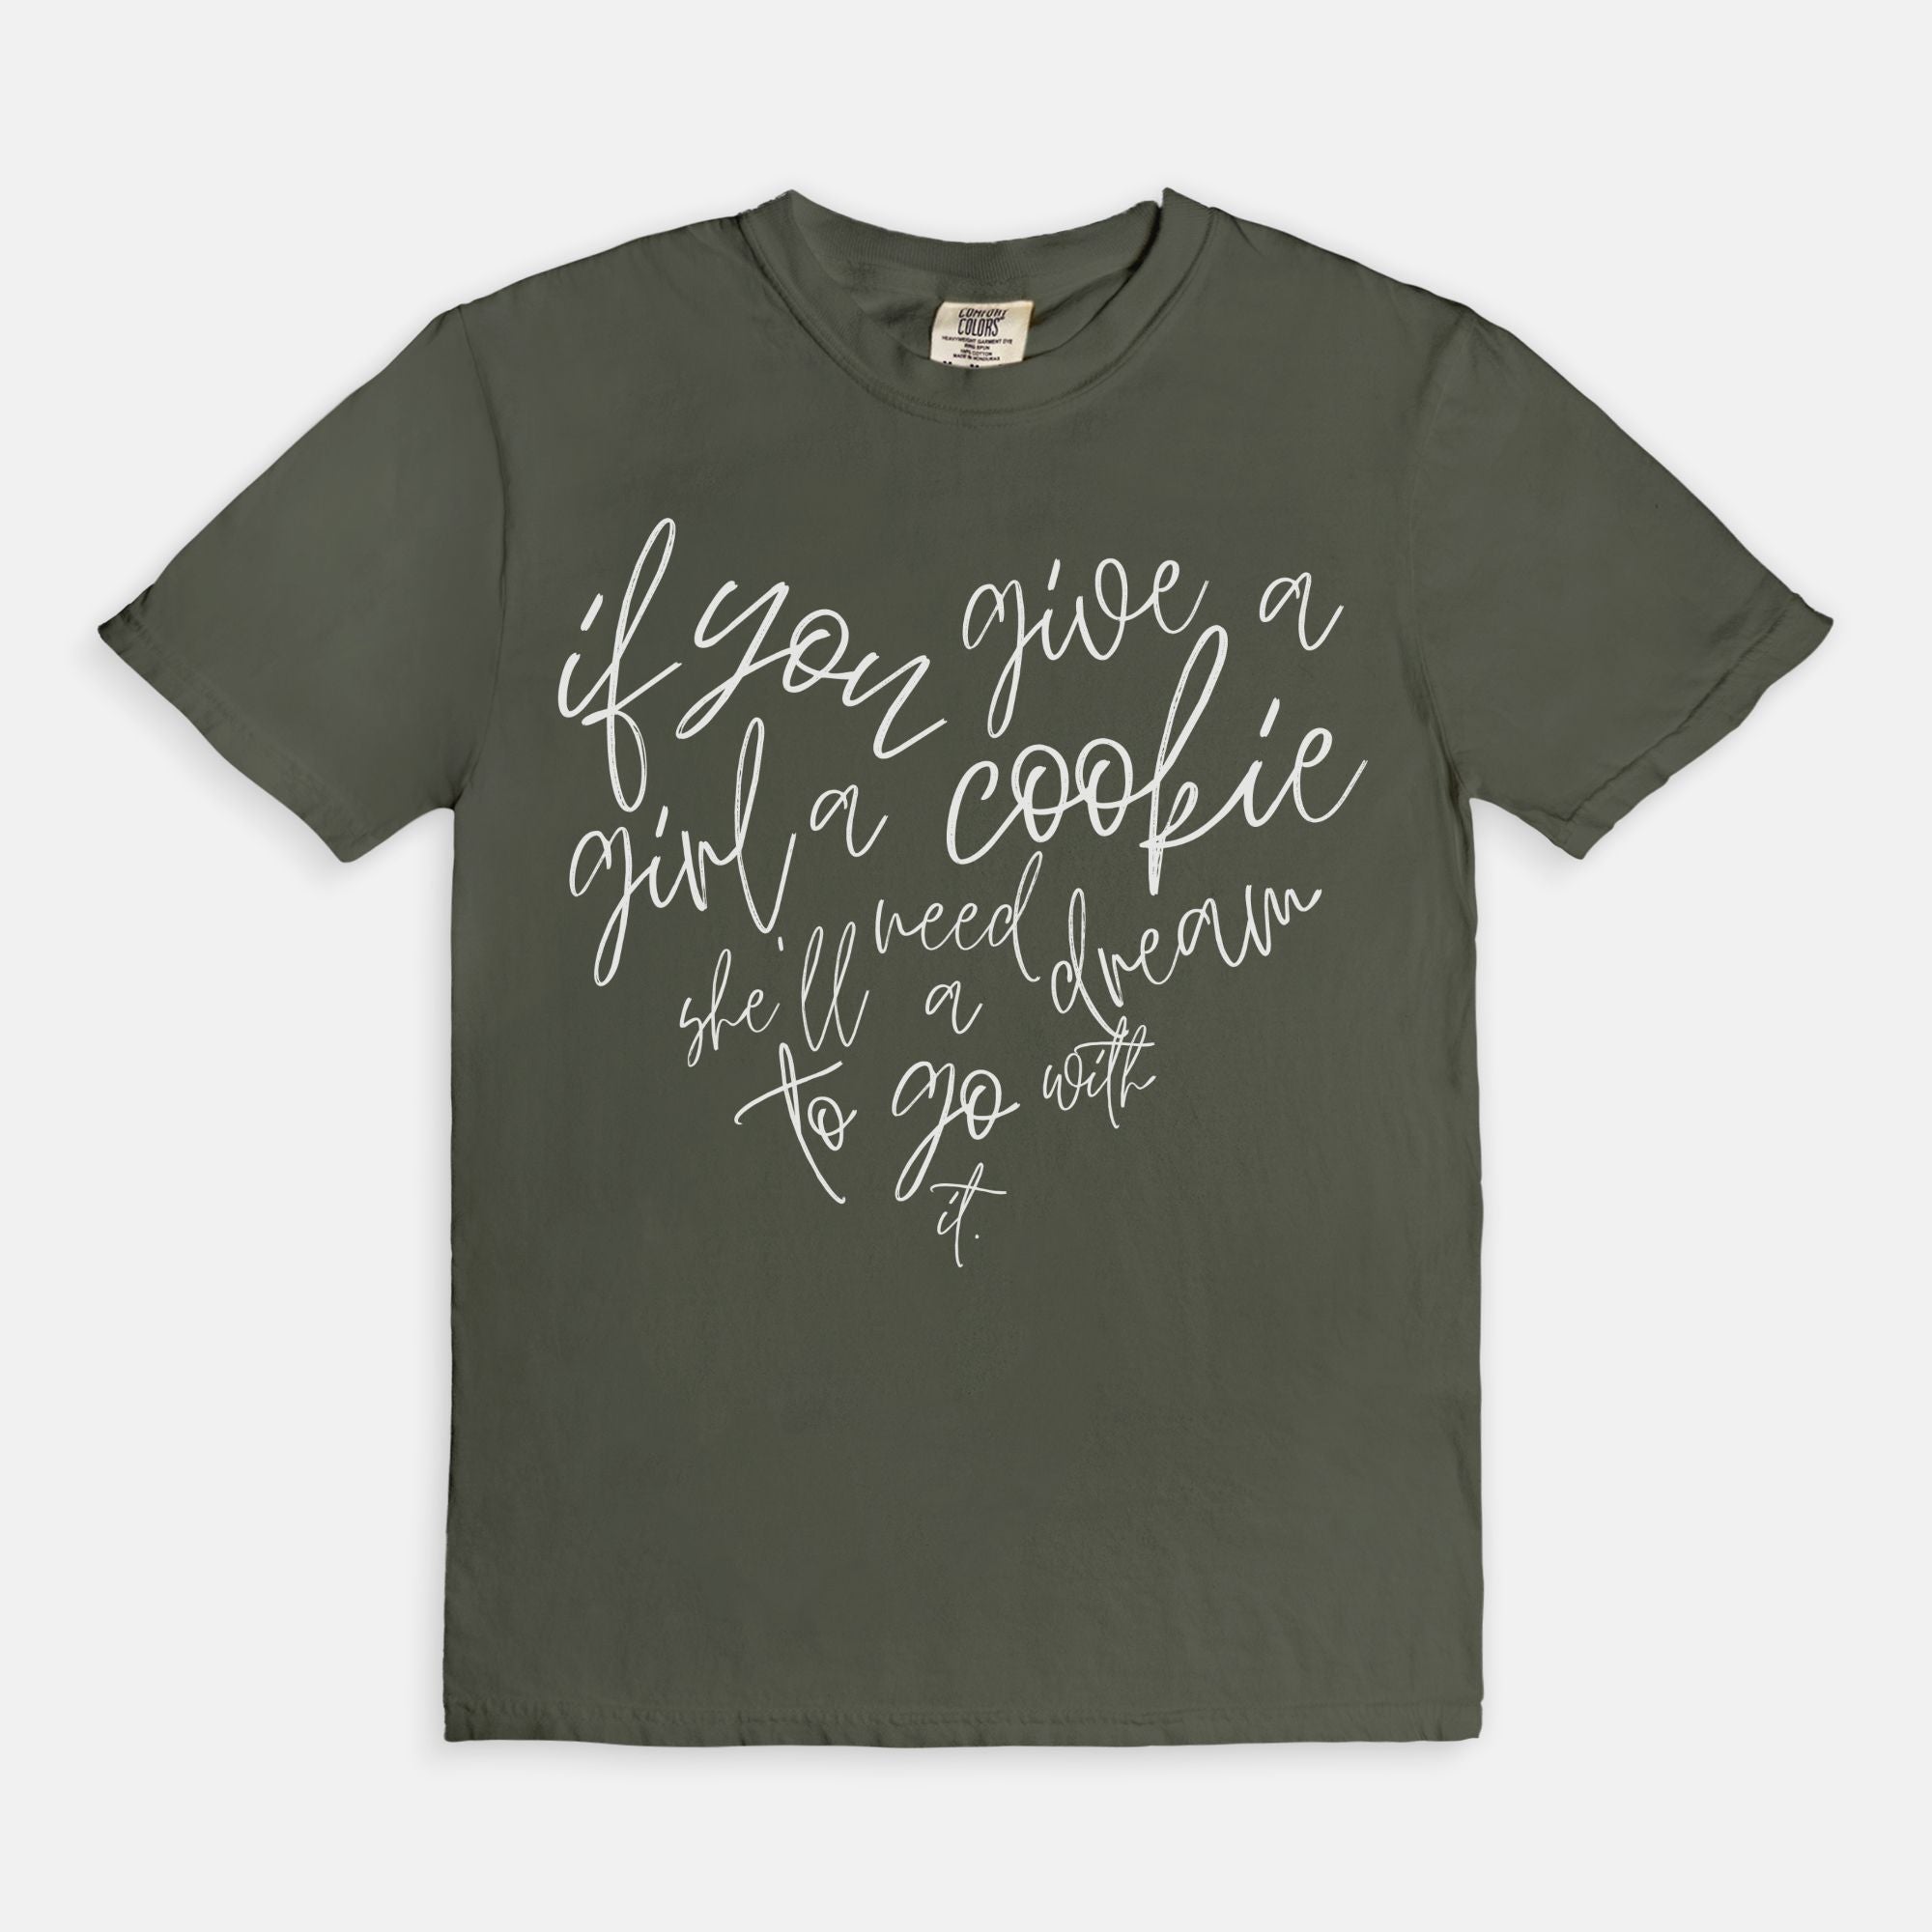 If you give a girl a cookie, she'll need a dream to go with it tee